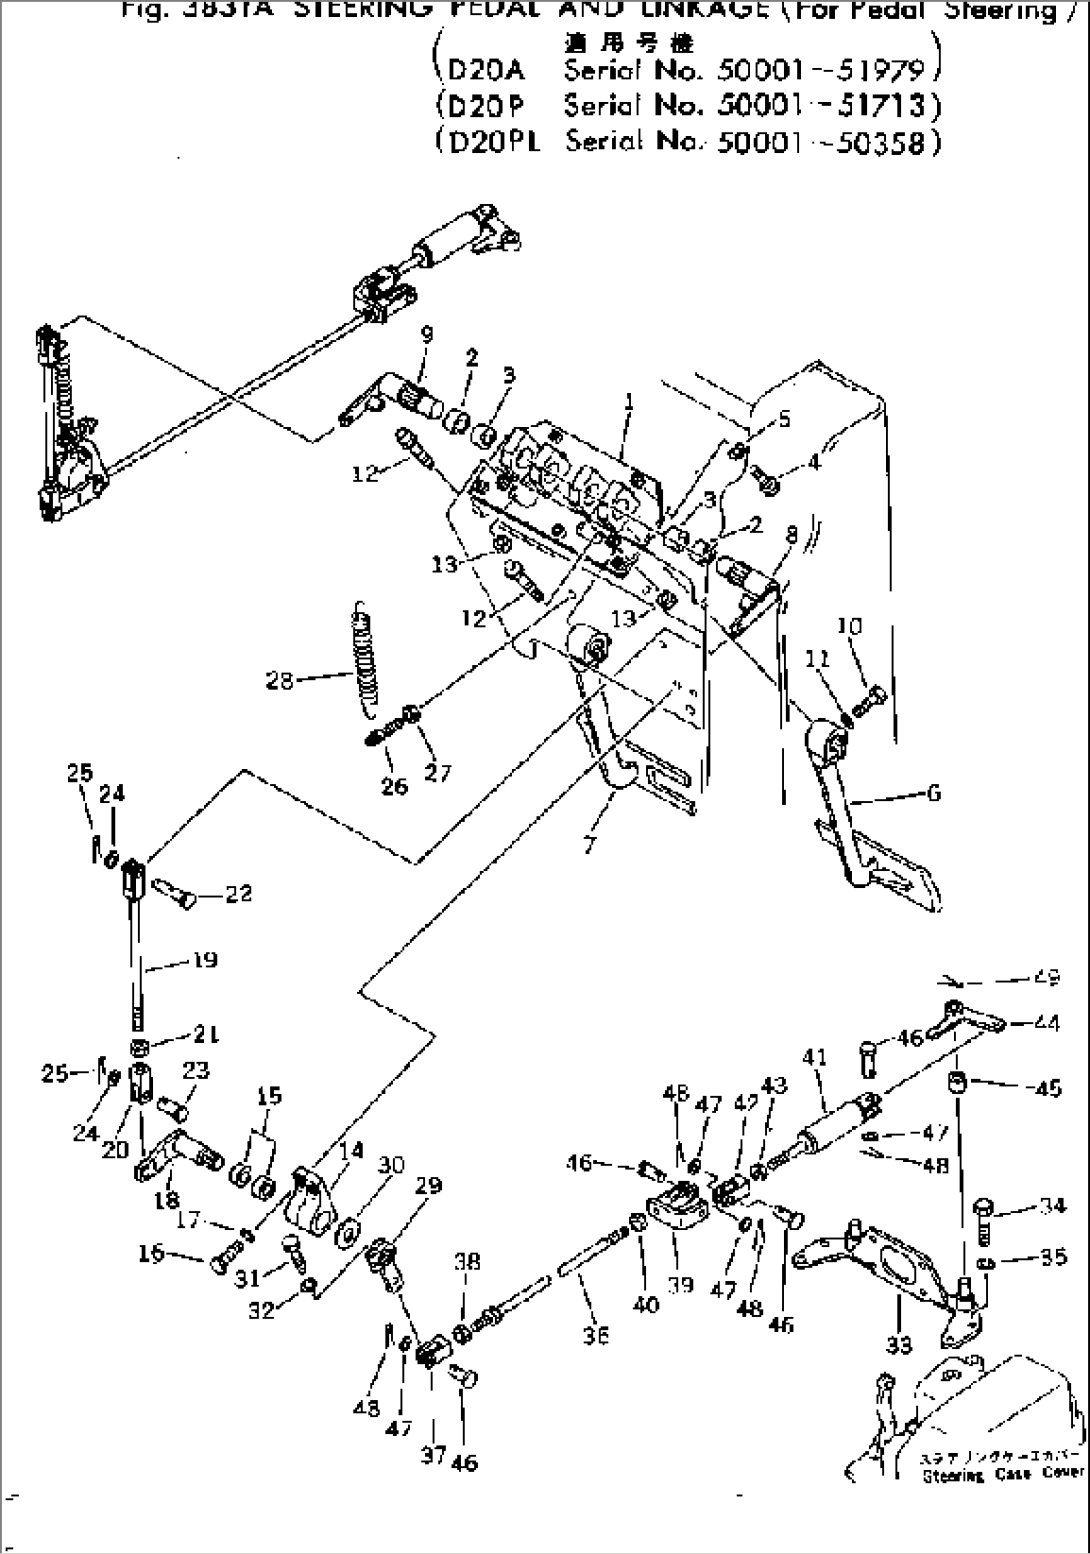 STEERING PEDAL AND LINKAGE (FOR PEDAL STEERING)(#50001-51713)